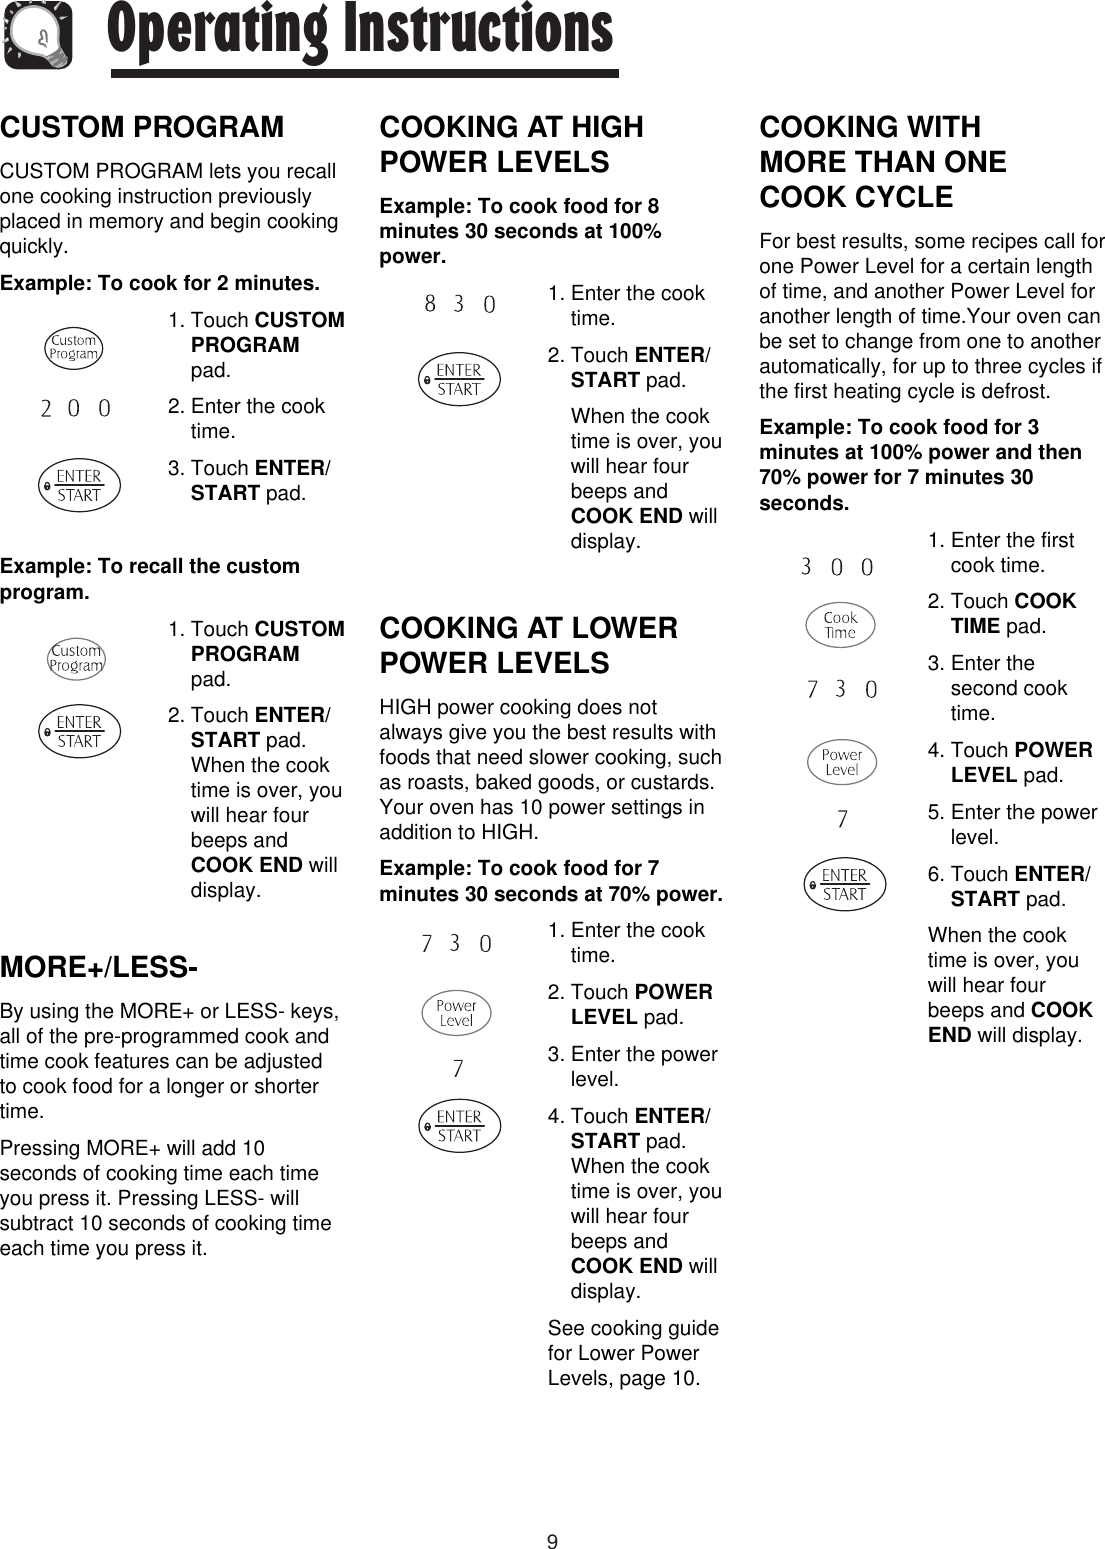 9Operating InstructionsCUSTOM PROGRAMCUSTOM PROGRAM lets you recallone cooking instruction previouslyplaced in memory and begin cookingquickly.Example: To cook for 2 minutes.1. Touch CUSTOMPROGRAMpad.2. Enter the cooktime.3. Touch ENTER/START pad.Example: To recall the customprogram.1. Touch CUSTOMPROGRAMpad.2. Touch ENTER/START pad.When the cooktime is over, youwill hear fourbeeps andCOOK END willdisplay. MORE+/LESS-By using the MORE+ or LESS- keys,all of the pre-programmed cook andtime cook features can be adjustedto cook food for a longer or shortertime.Pressing MORE+ will add 10seconds of cooking time each timeyou press it. Pressing LESS- willsubtract 10 seconds of cooking timeeach time you press it.COOKING AT HIGHPOWER LEVELSExample: To cook food for 8minutes 30 seconds at 100%power.1. Enter the cooktime.2. Touch ENTER/START pad.When the cooktime is over, youwill hear fourbeeps andCOOK END willdisplay.COOKING AT LOWERPOWER LEVELSHIGH power cooking does notalways give you the best results withfoods that need slower cooking, suchas roasts, baked goods, or custards.Your oven has 10 power settings inaddition to HIGH.Example: To cook food for 7minutes 30 seconds at 70% power.1. Enter the cooktime.2. Touch POWERLEVEL pad.3. Enter the powerlevel.4. Touch ENTER/START pad.When the cooktime is over, youwill hear fourbeeps andCOOK END willdisplay.See cooking guidefor Lower PowerLevels, page 10.COOKING WITH MORE THAN ONE COOK CYCLEFor best results, some recipes call forone Power Level for a certain lengthof time, and another Power Level foranother length of time.Your oven canbe set to change from one to anotherautomatically, for up to three cycles ifthe first heating cycle is defrost.Example: To cook food for 3minutes at 100% power and then70% power for 7 minutes 30seconds.1. Enter the firstcook time.2. Touch COOKTIME pad.3. Enter thesecond cooktime.4. Touch POWERLEVEL pad.5. Enter the powerlevel.6. Touch ENTER/START pad.When the cooktime is over, youwill hear fourbeeps and COOKEND will display.